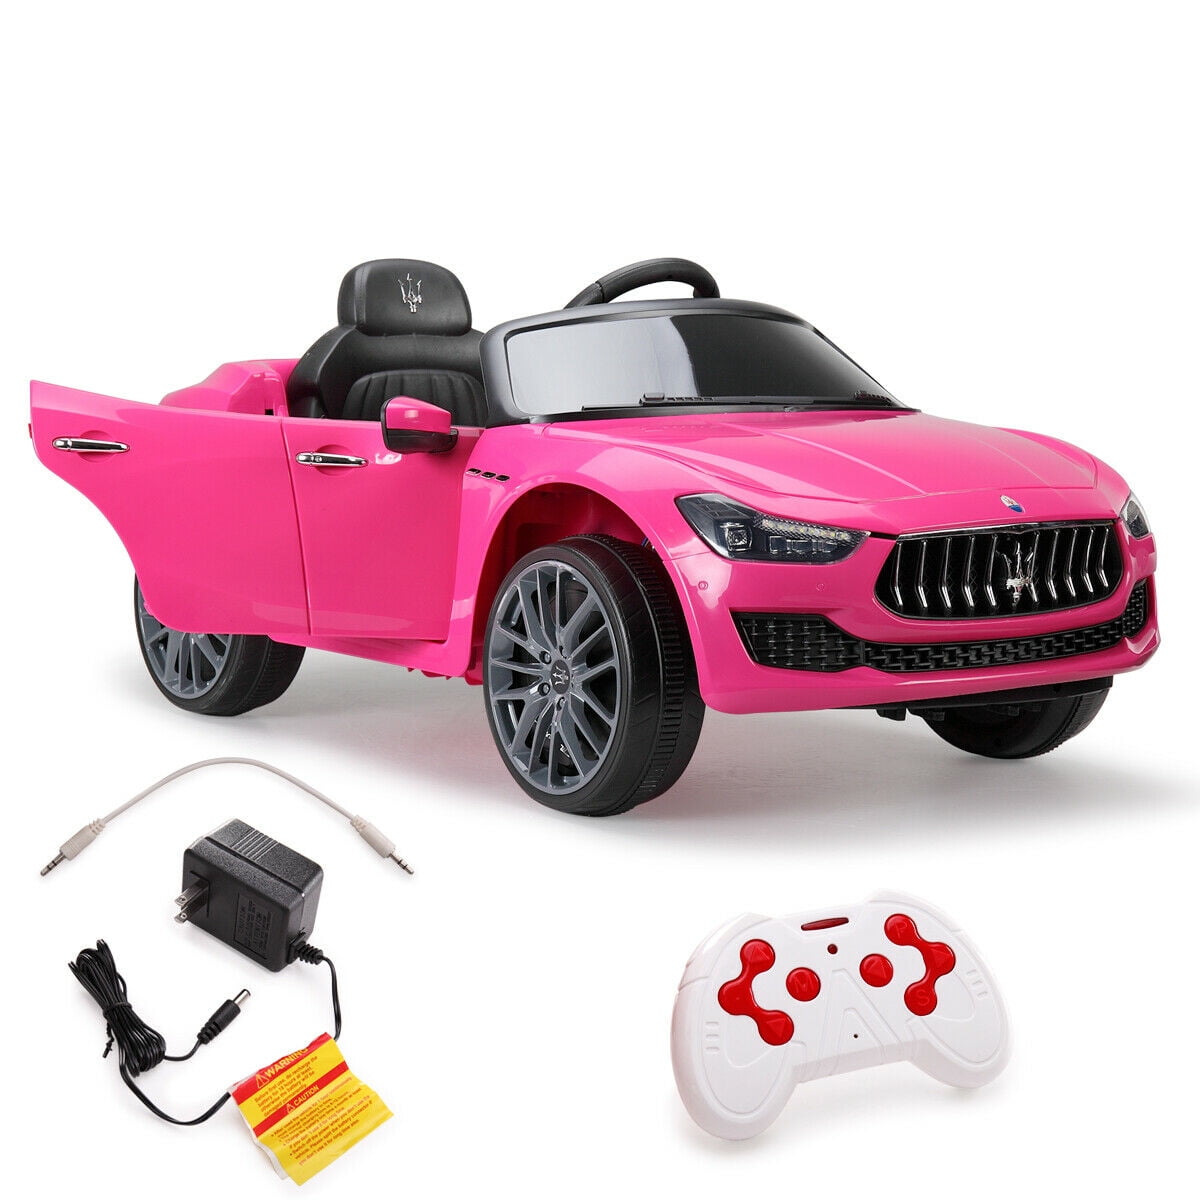 Hommoo 12V Electric Ride On Cars Motorized Vehicles for Kids, Toy Gift